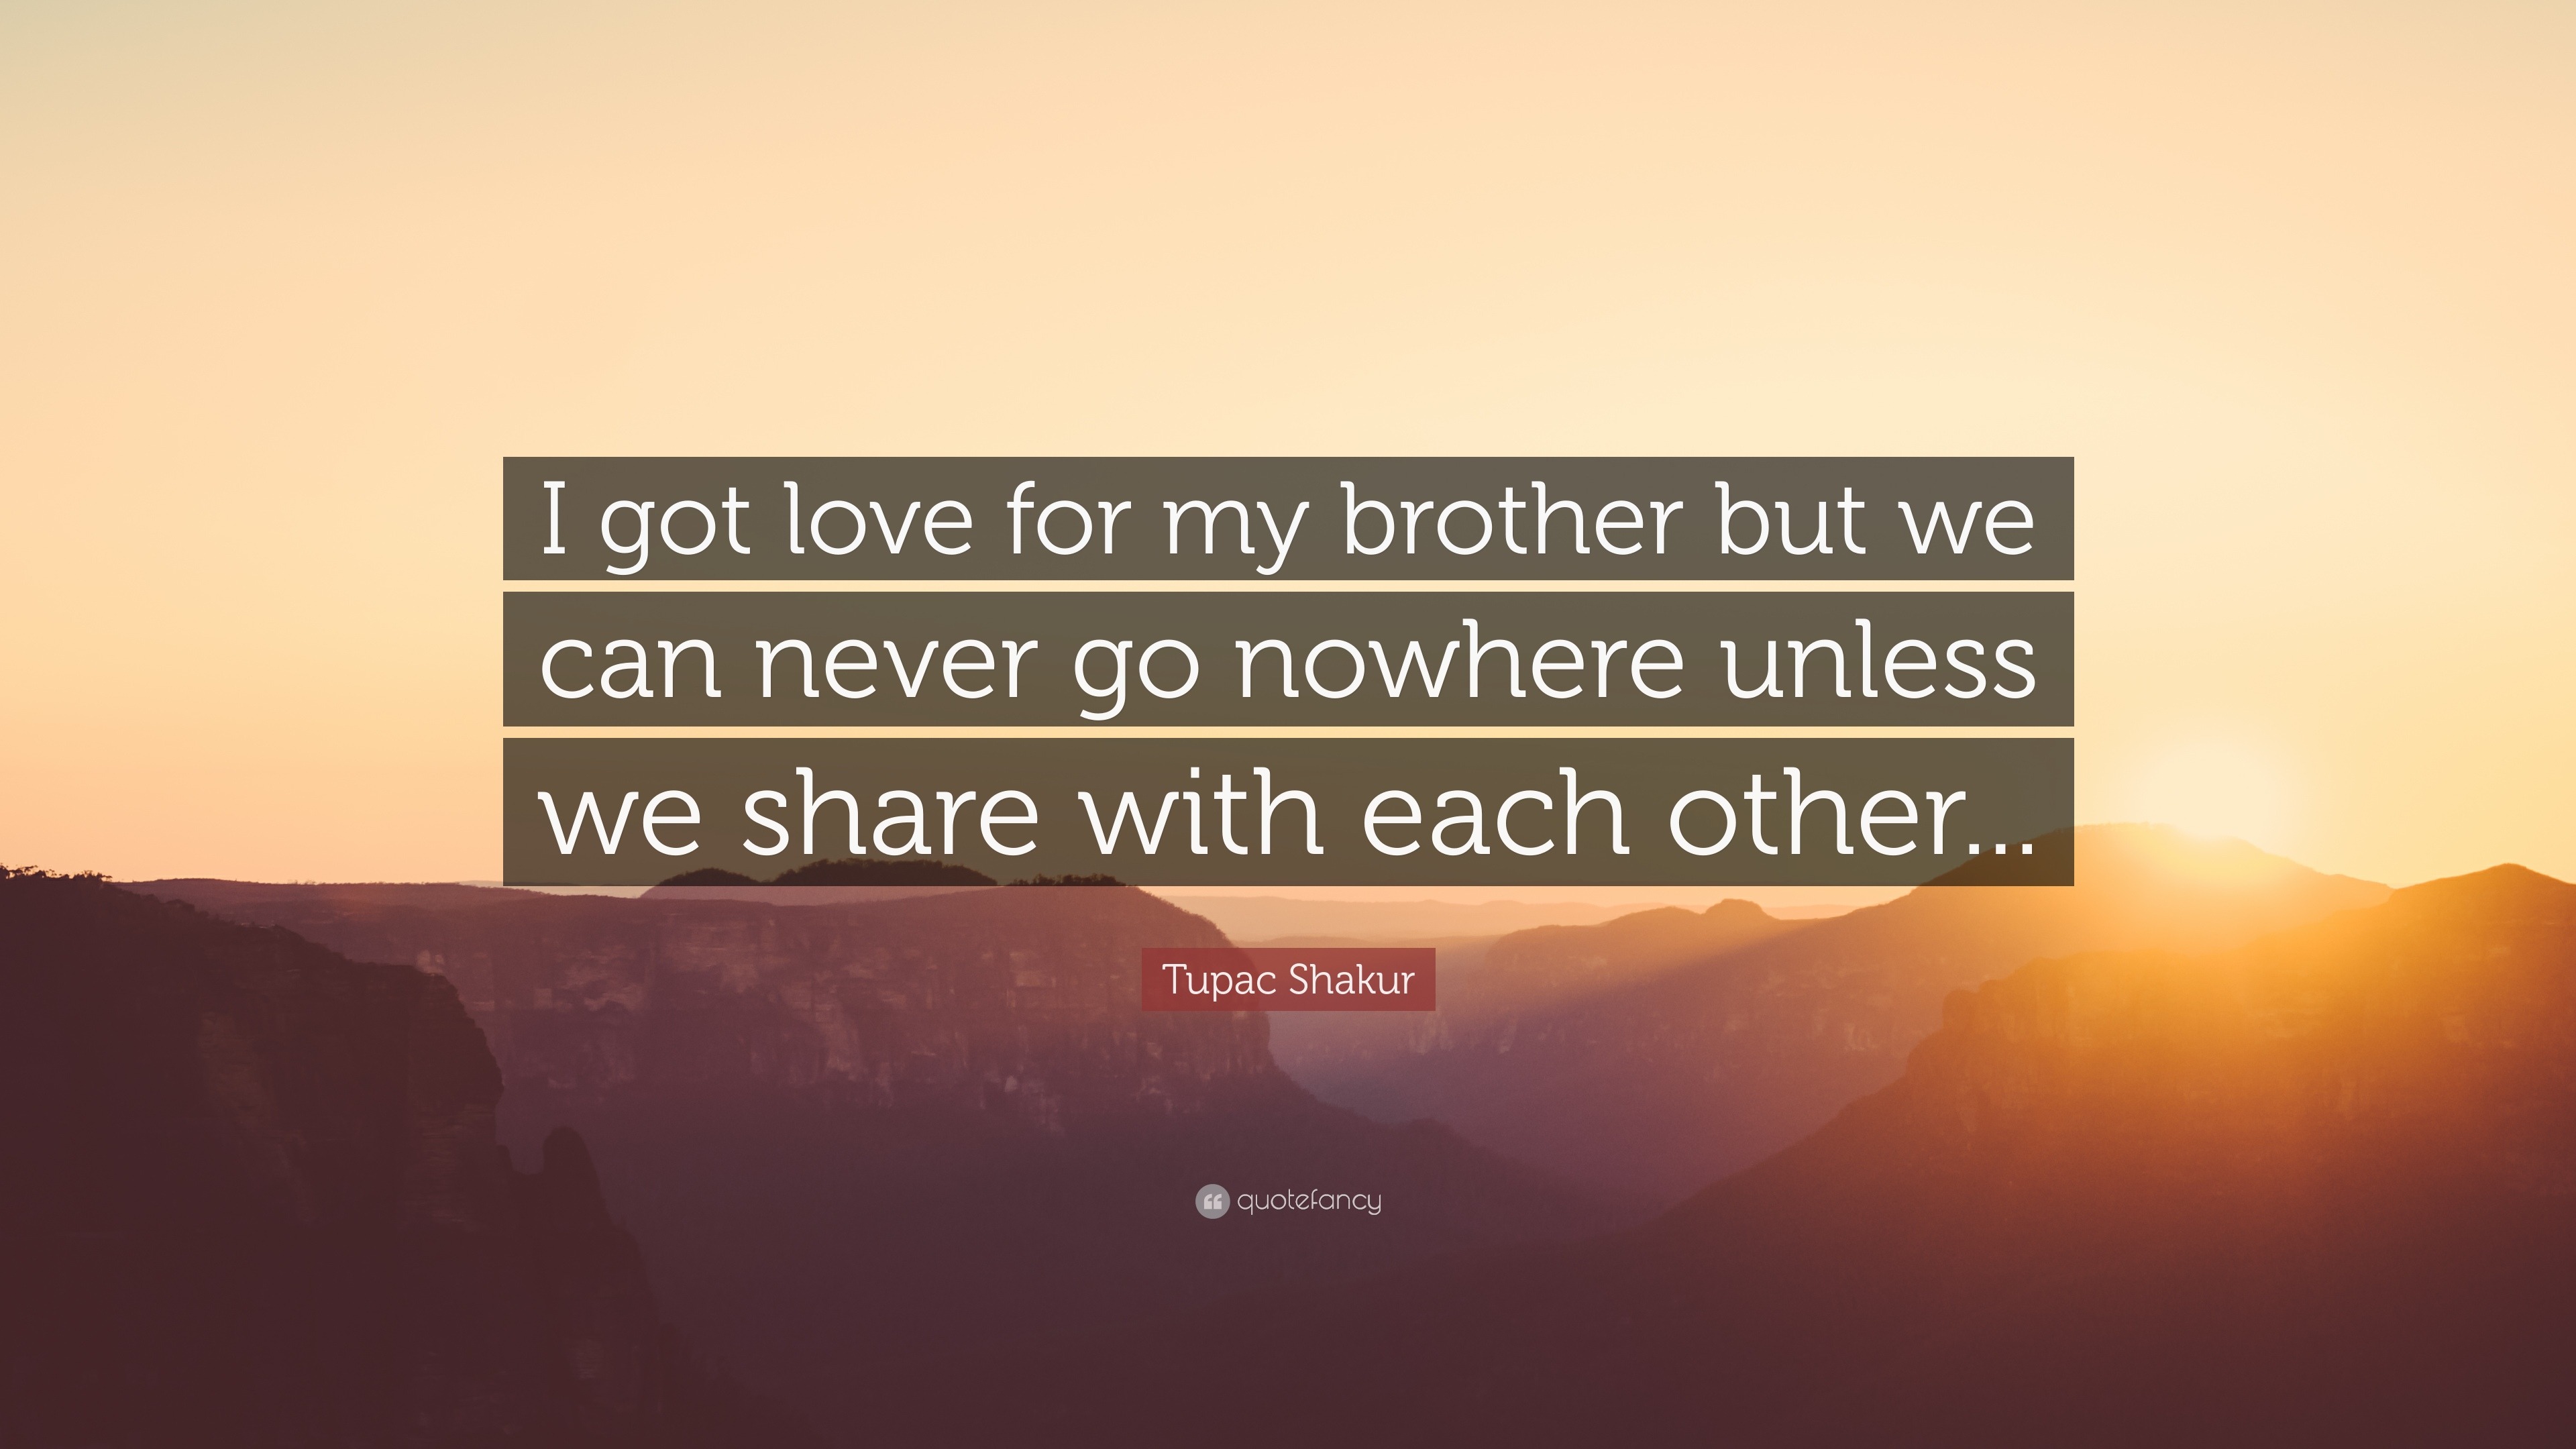 Tupac Shakur Quote “I got love for my brother but we can never go